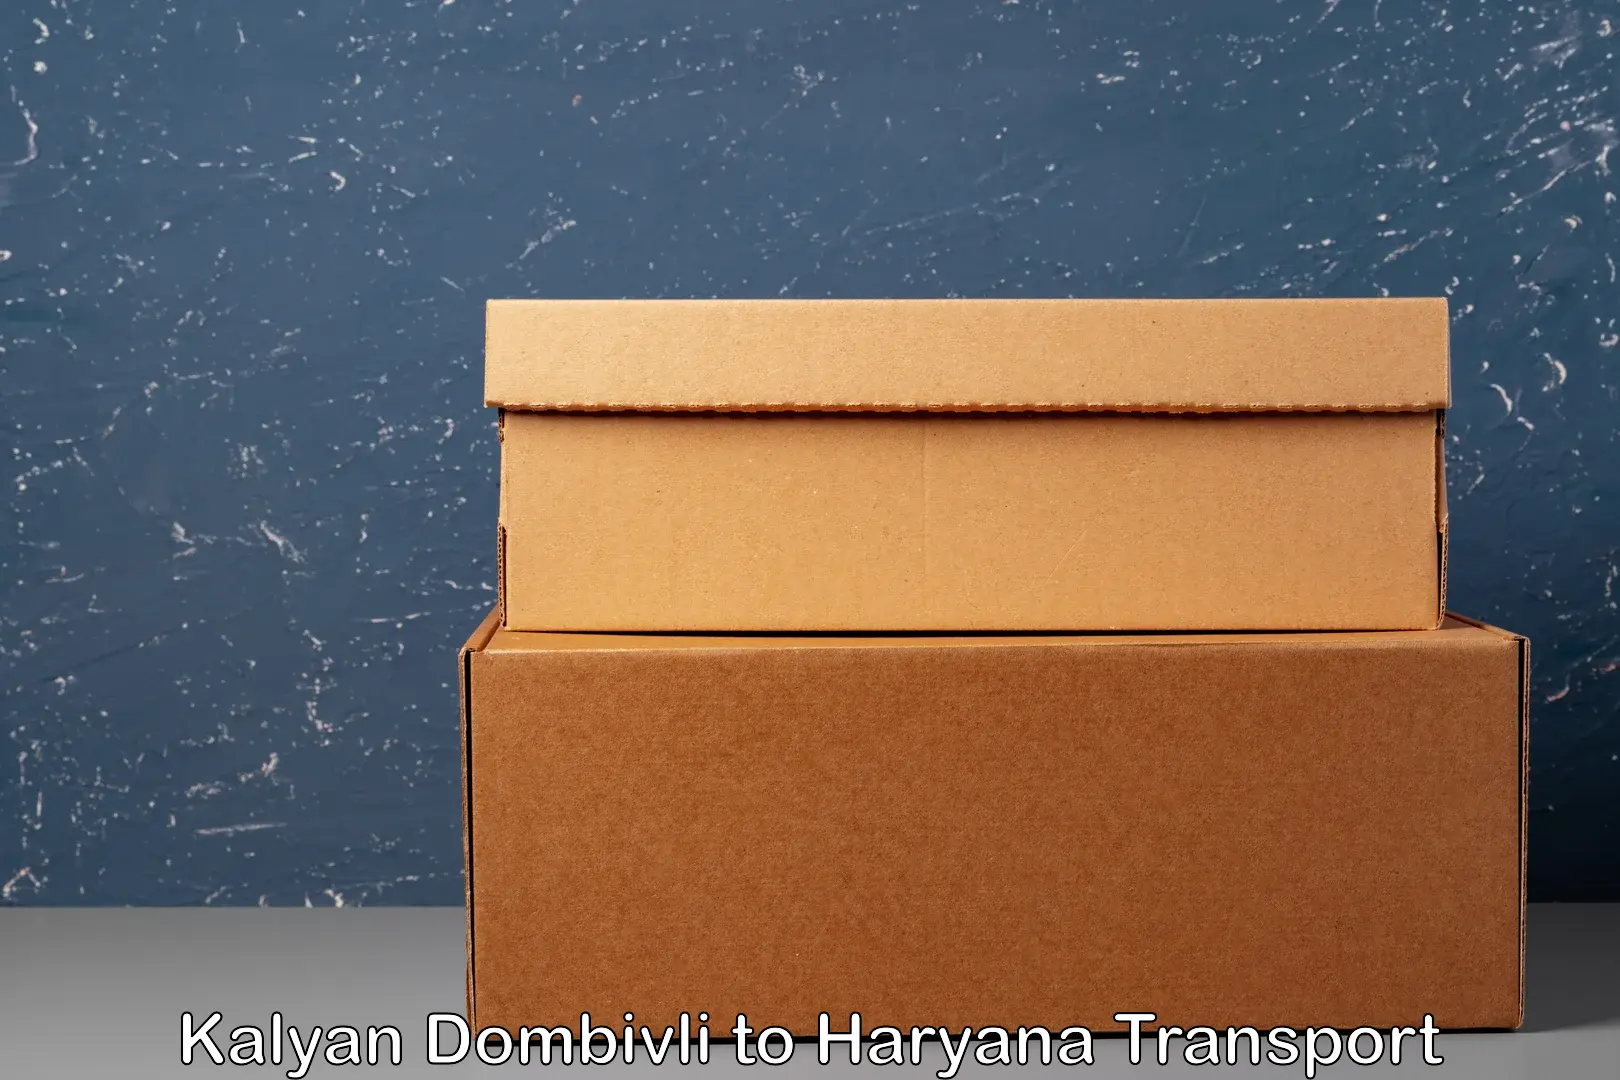 Cargo transport services in Kalyan Dombivli to Chaudhary Charan Singh Haryana Agricultural University Hisar